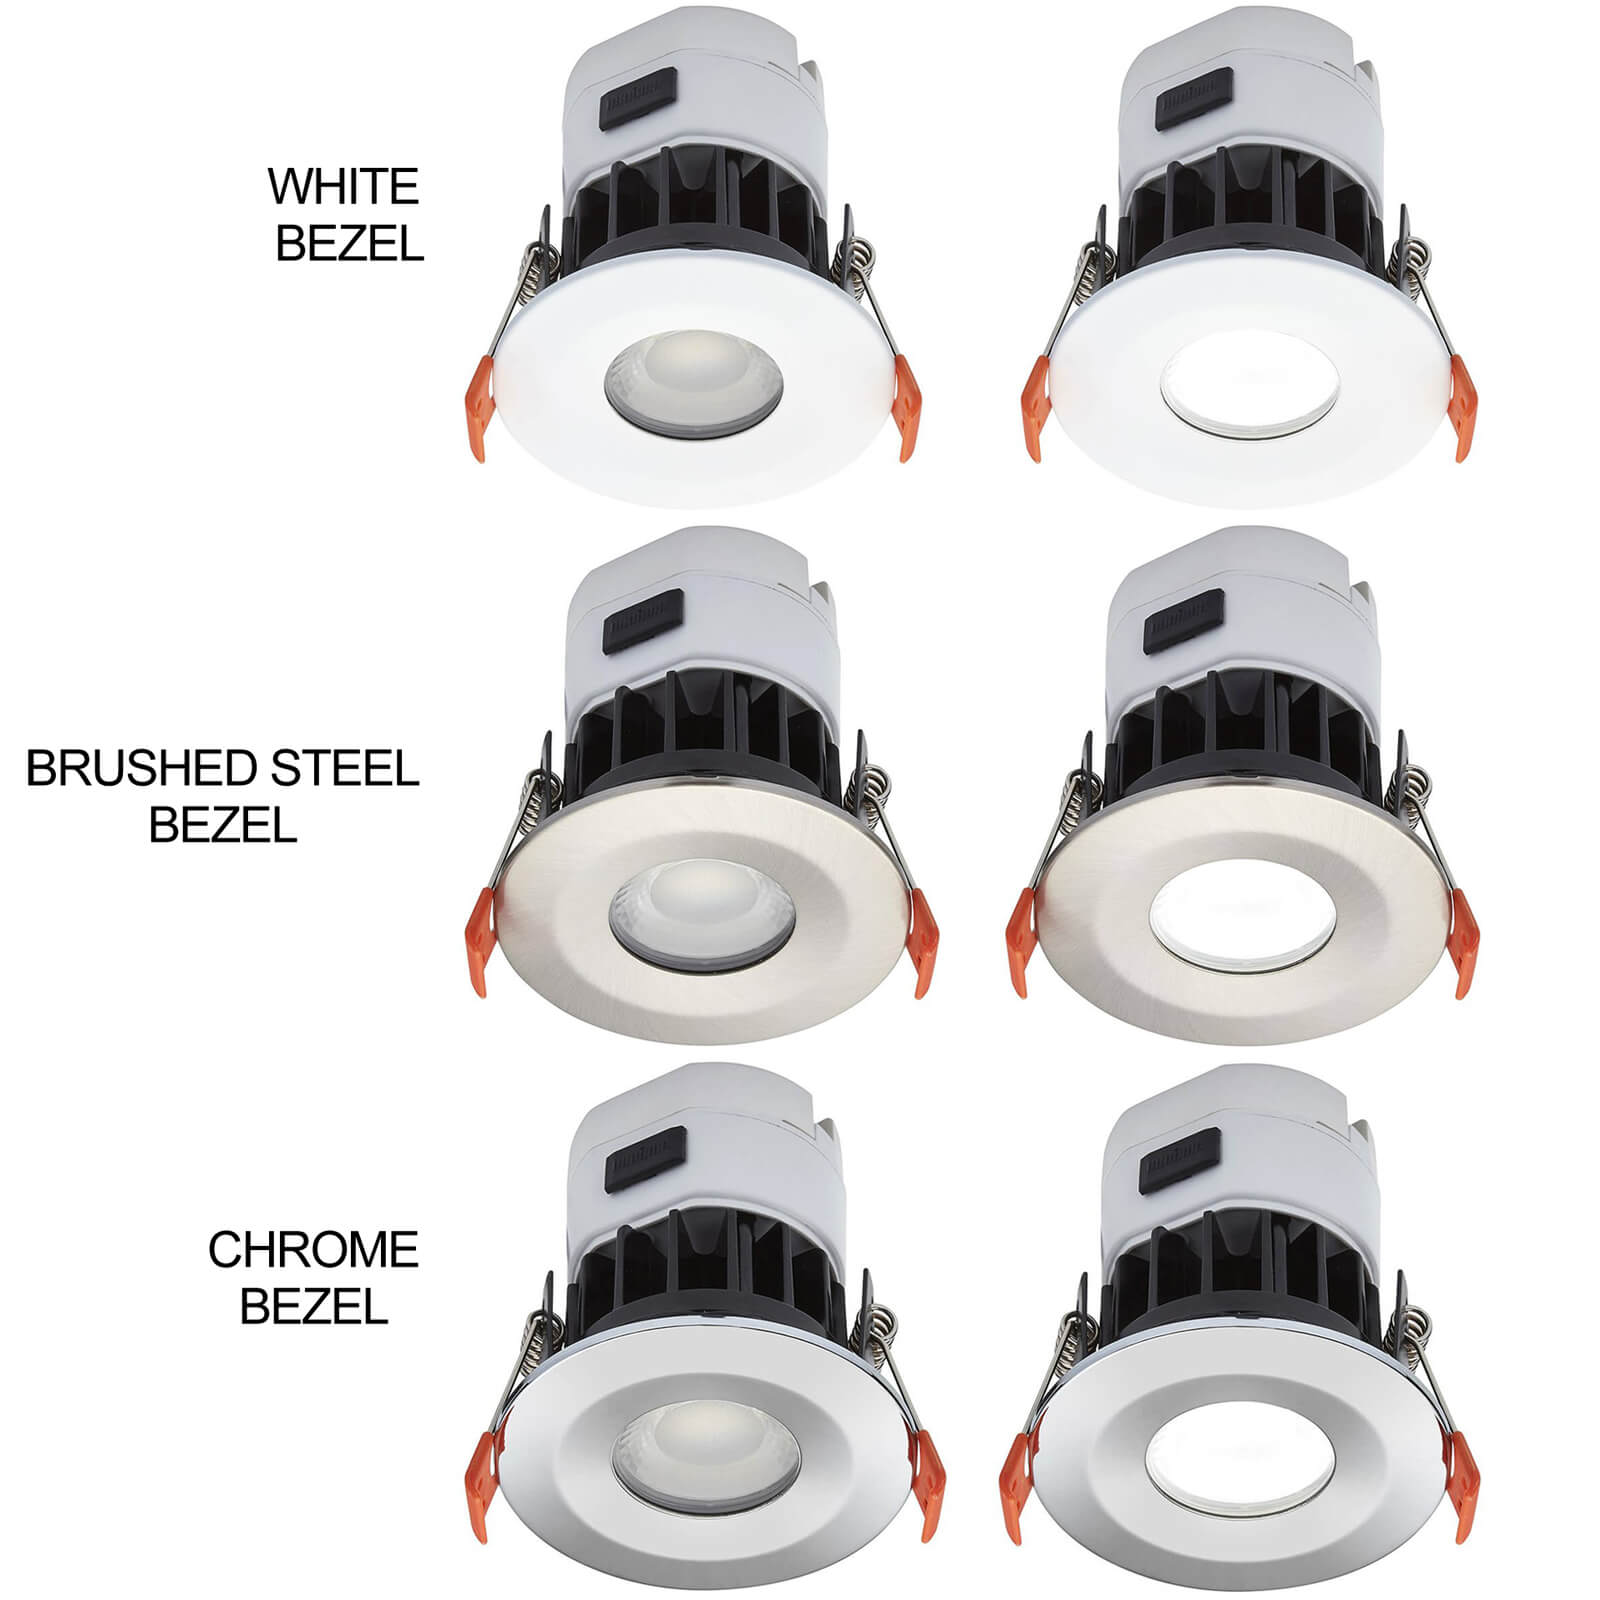 Sensio Kitchen Bathroom TrioTone Fire Rated IP65 Downlight Dimmable 